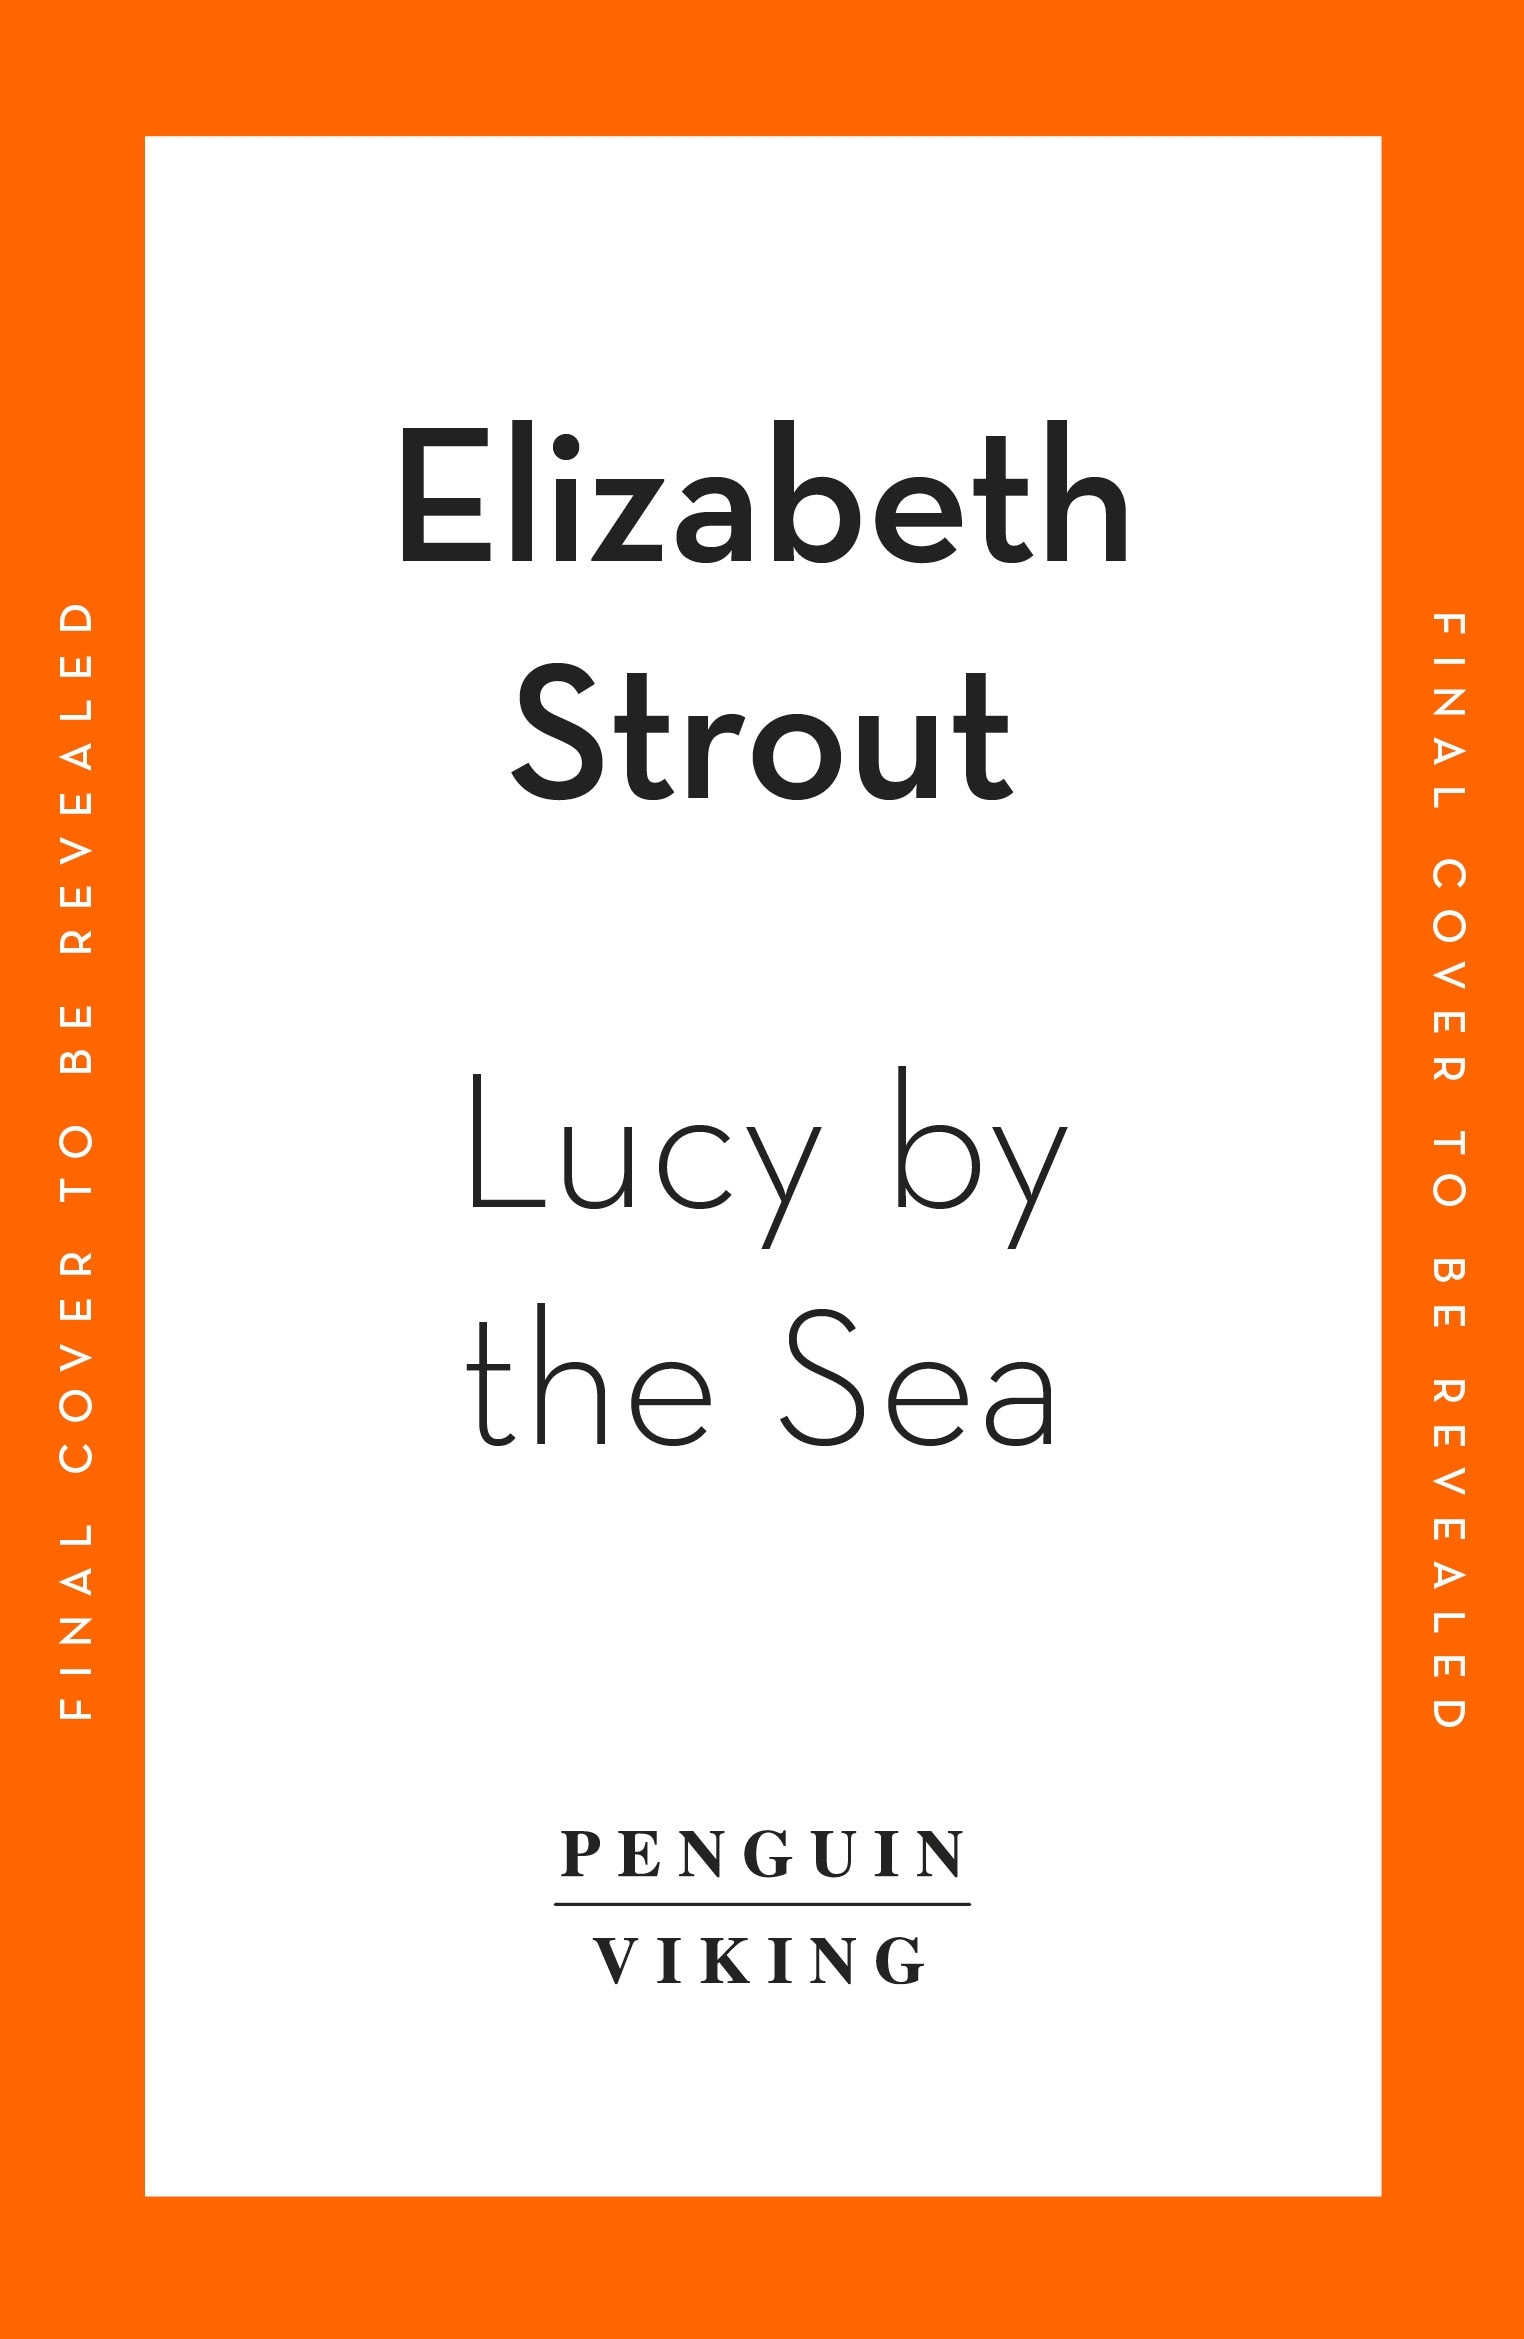 Book “Lucy By The Sea” by Elizabeth Strout — October 6, 2022